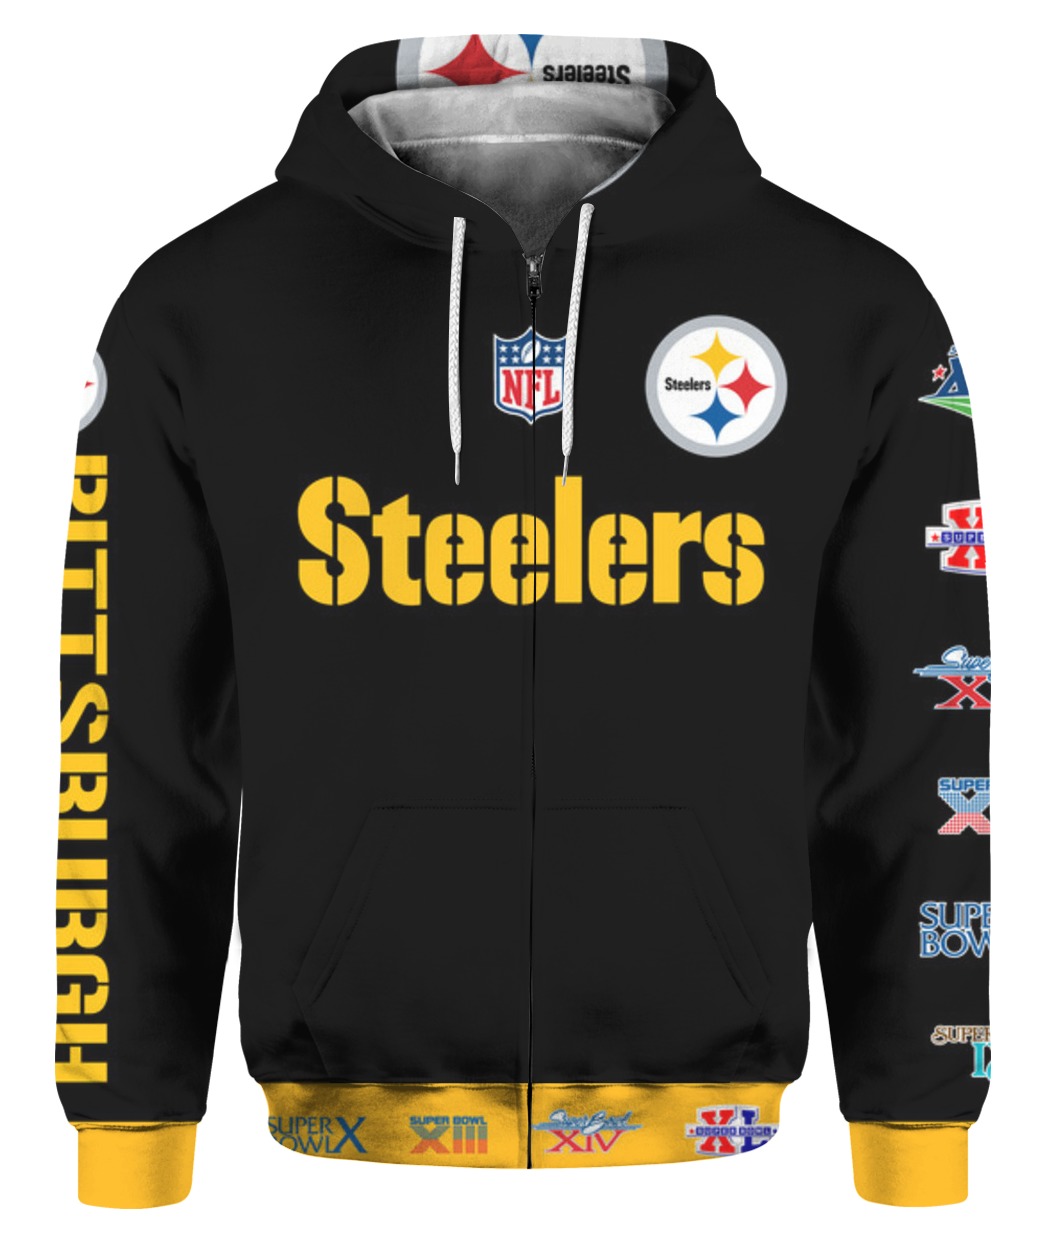 Stand for the flag kneel for the cross pittsburgh steelers all over print zip hoodie